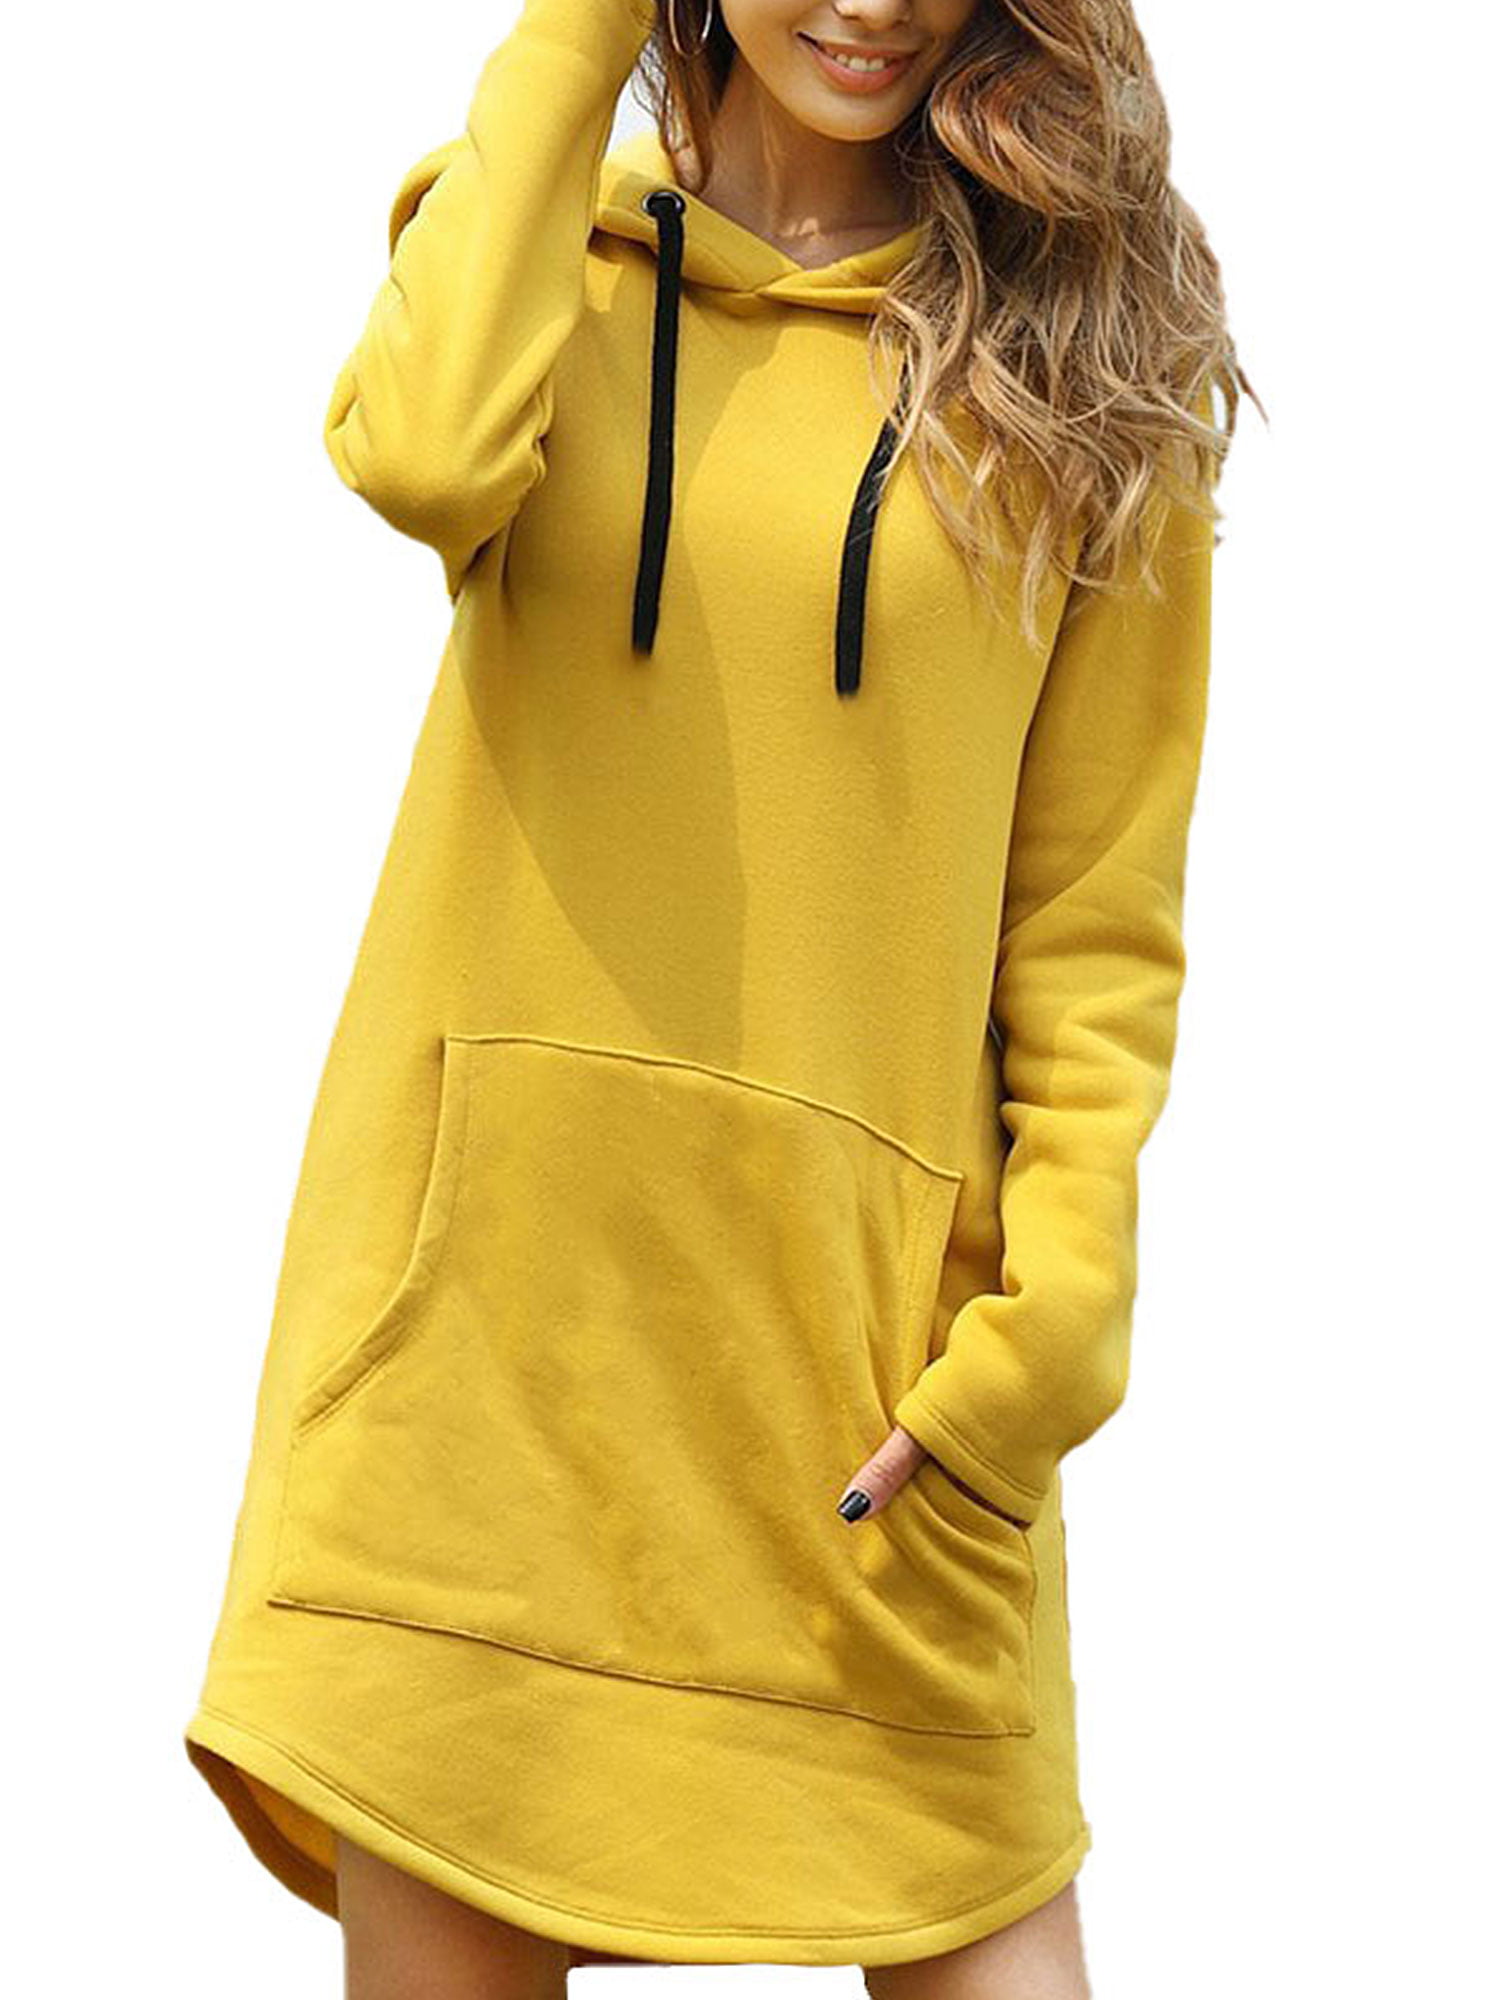 STYLEIE Women Drawstring Letter Cat Graphic Hoodie High-Low Hem Pockets Pullover 